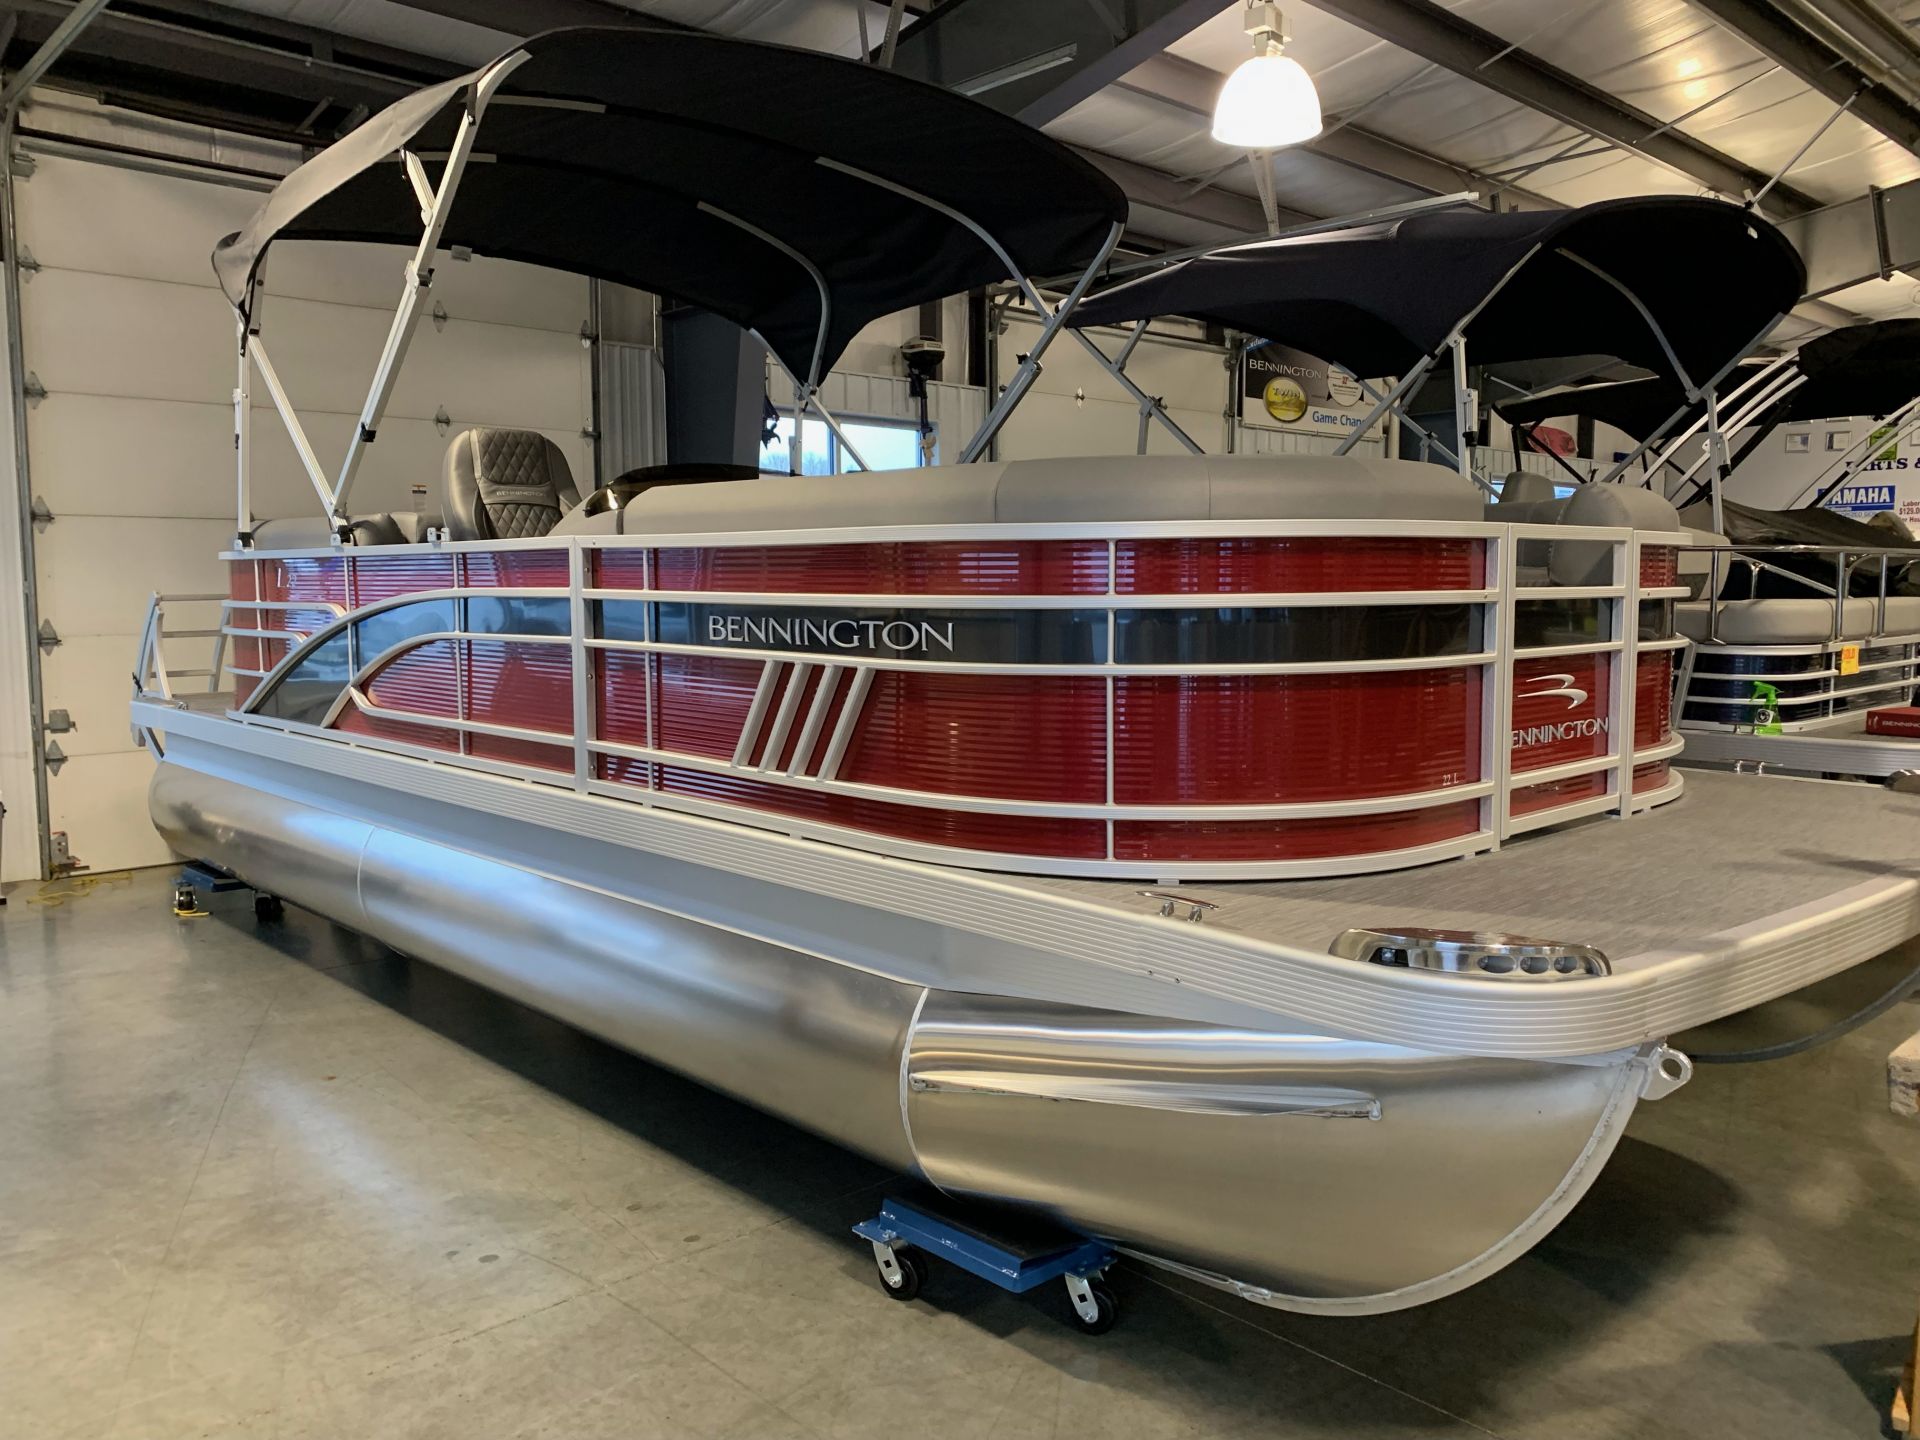 New Boats for Sale for the New Year!